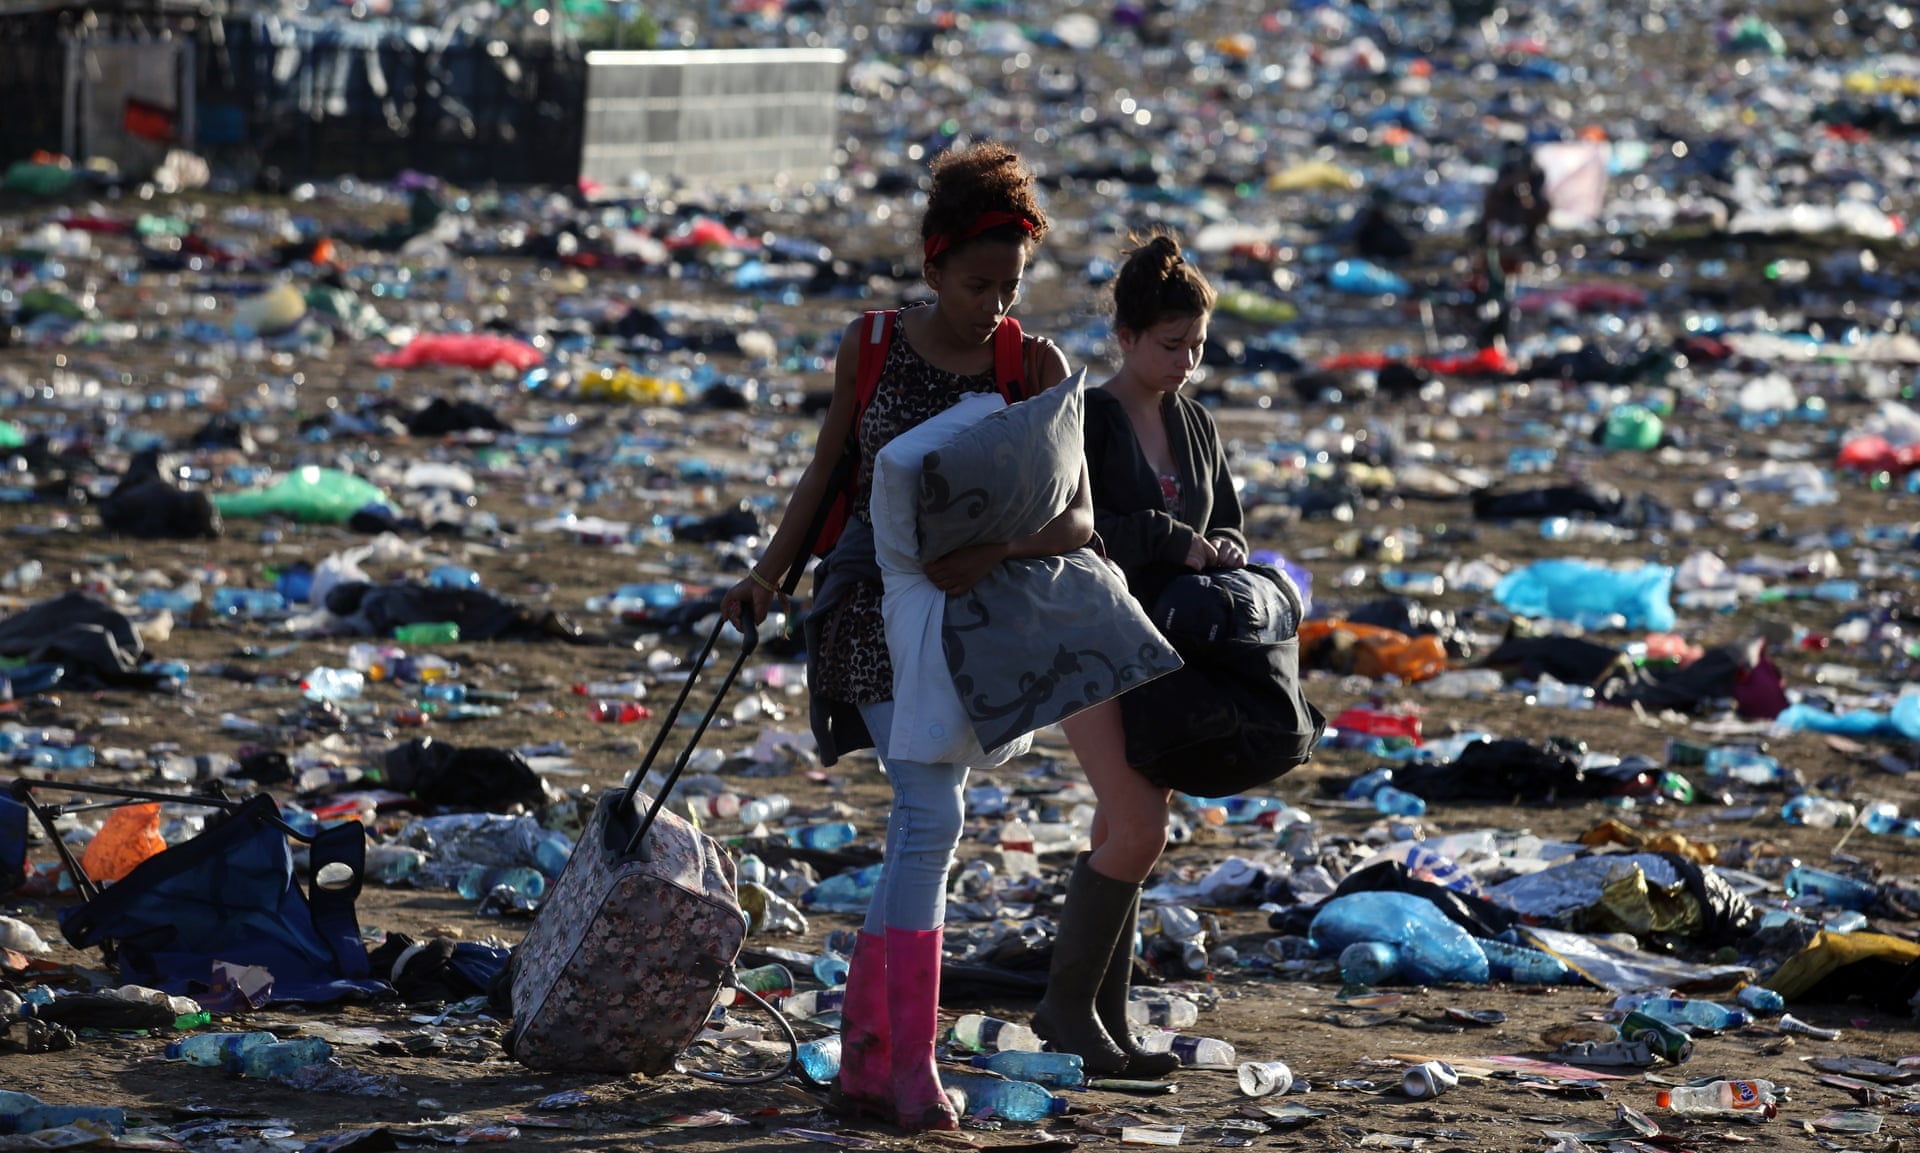 The Aftermath of Plastic Waste at Glastonbury 2017